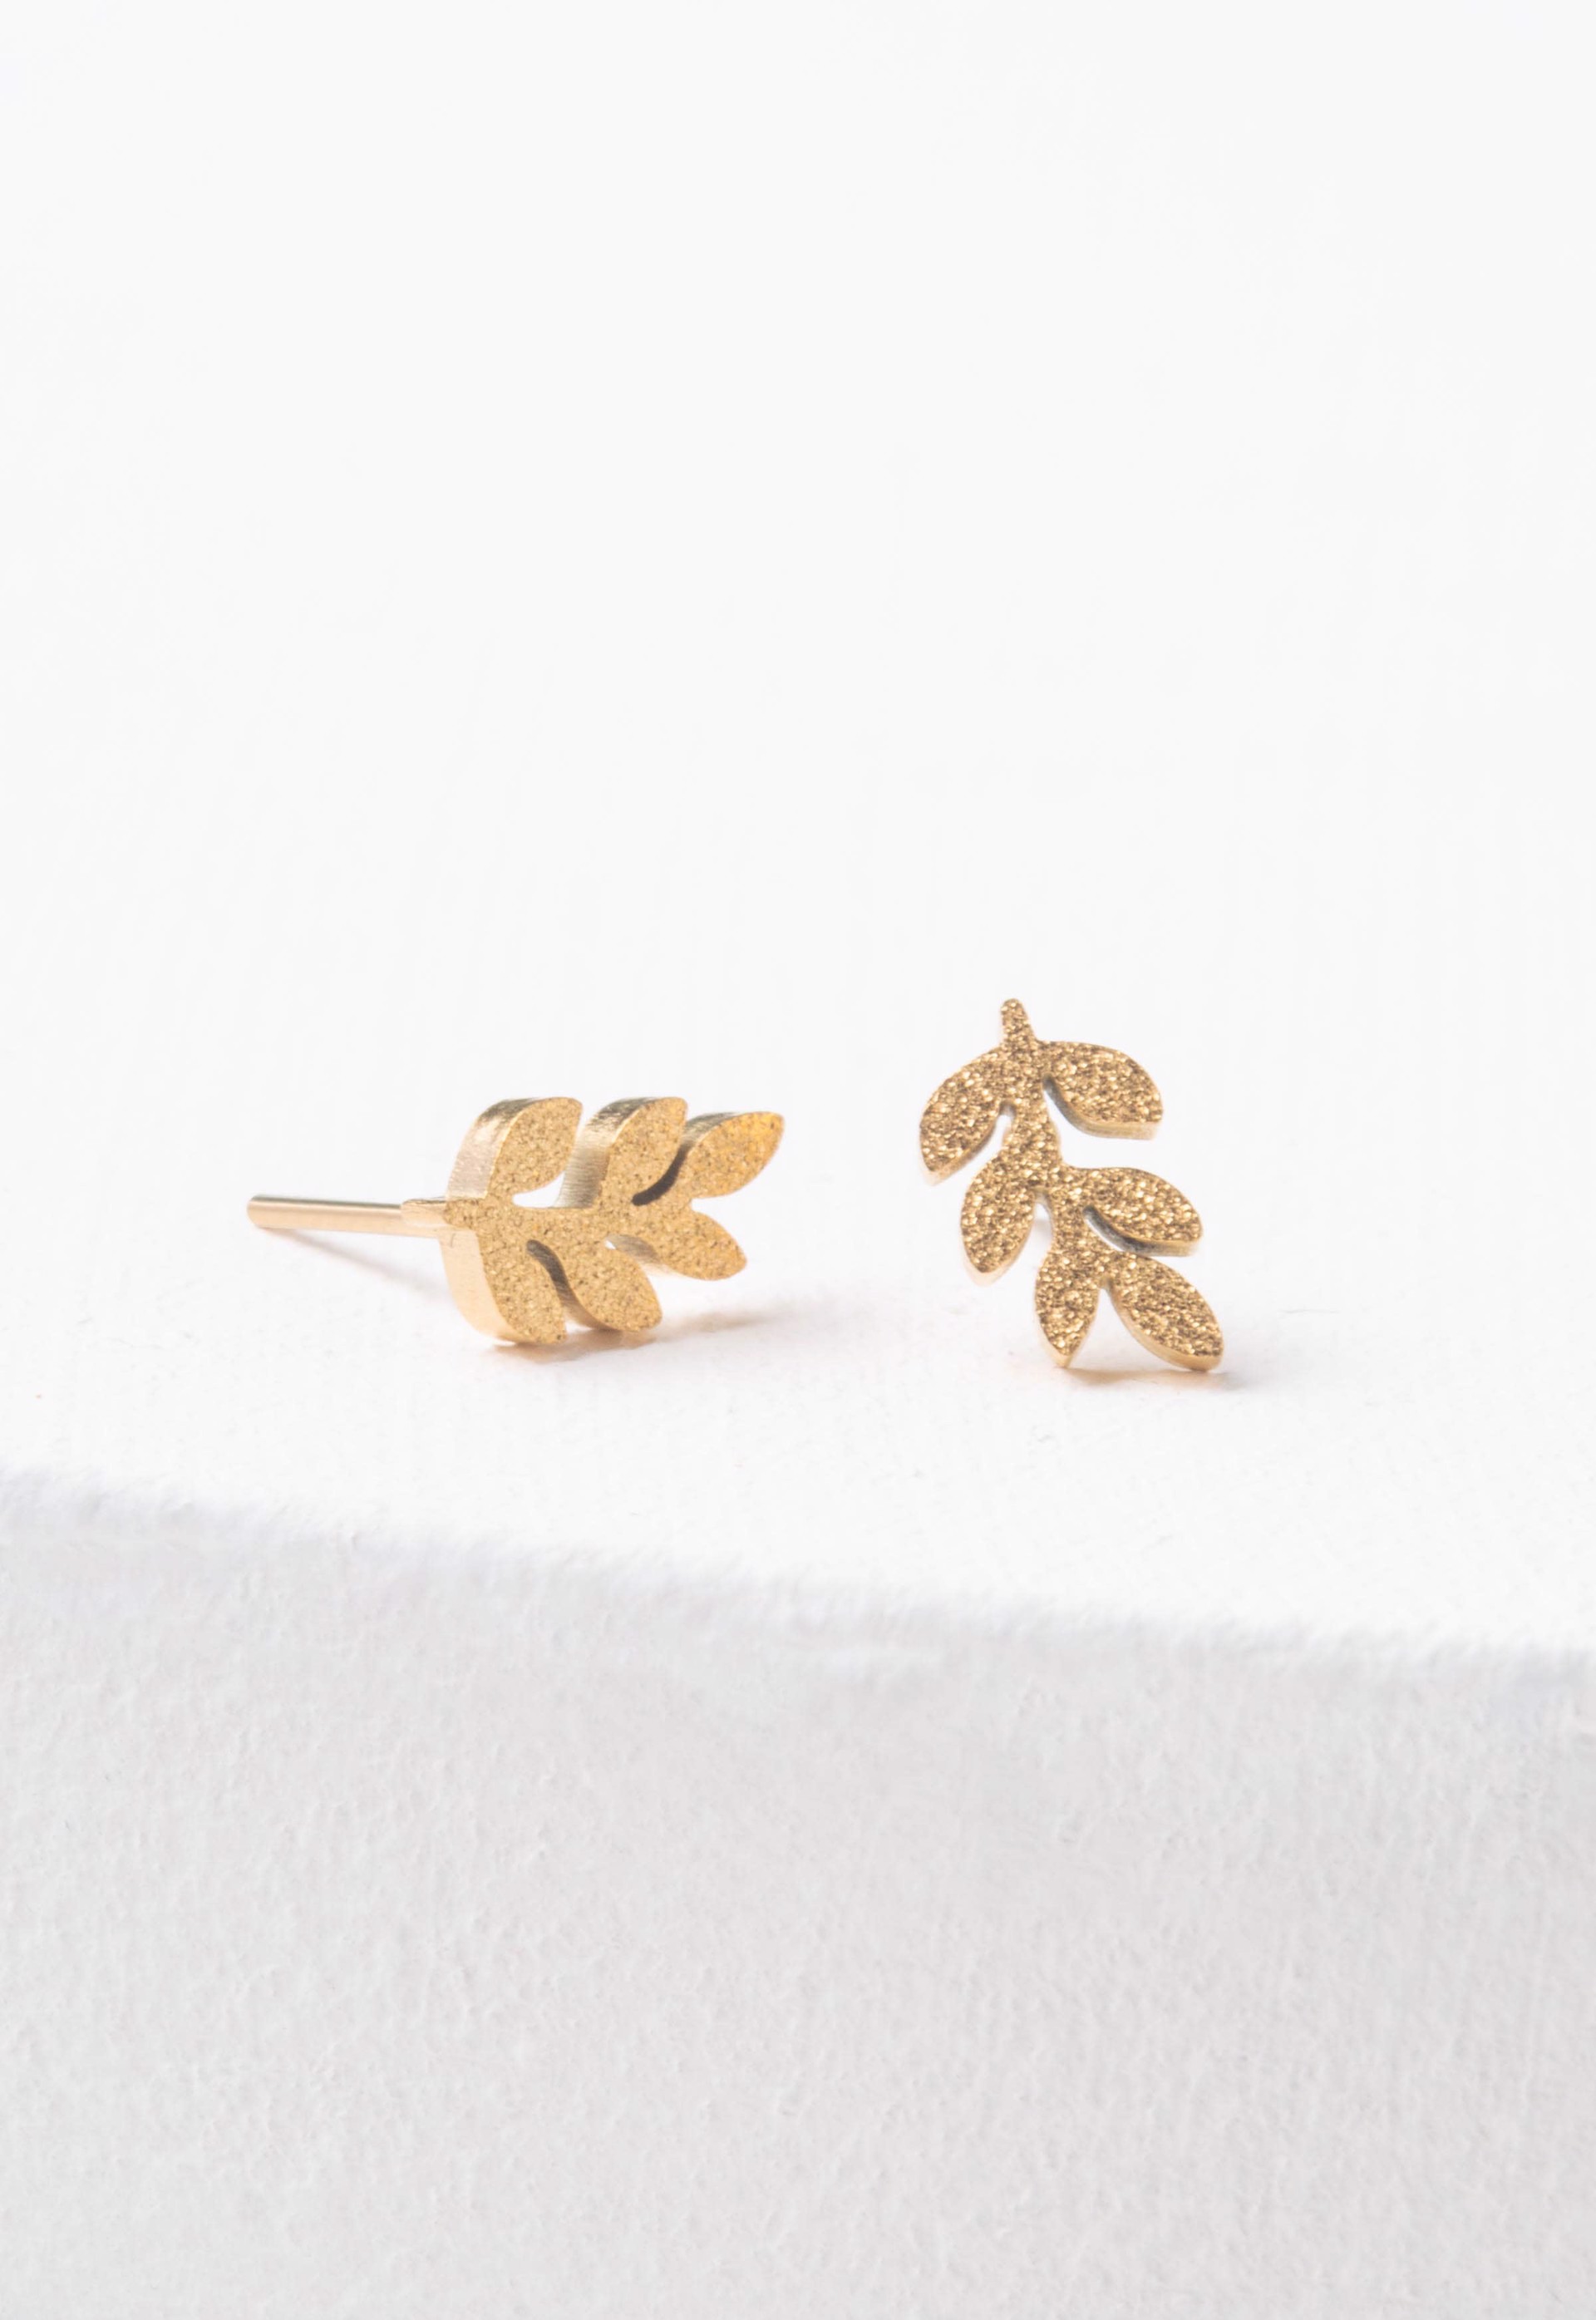 Frosted Rowen Stud Earrings by Starfish Project